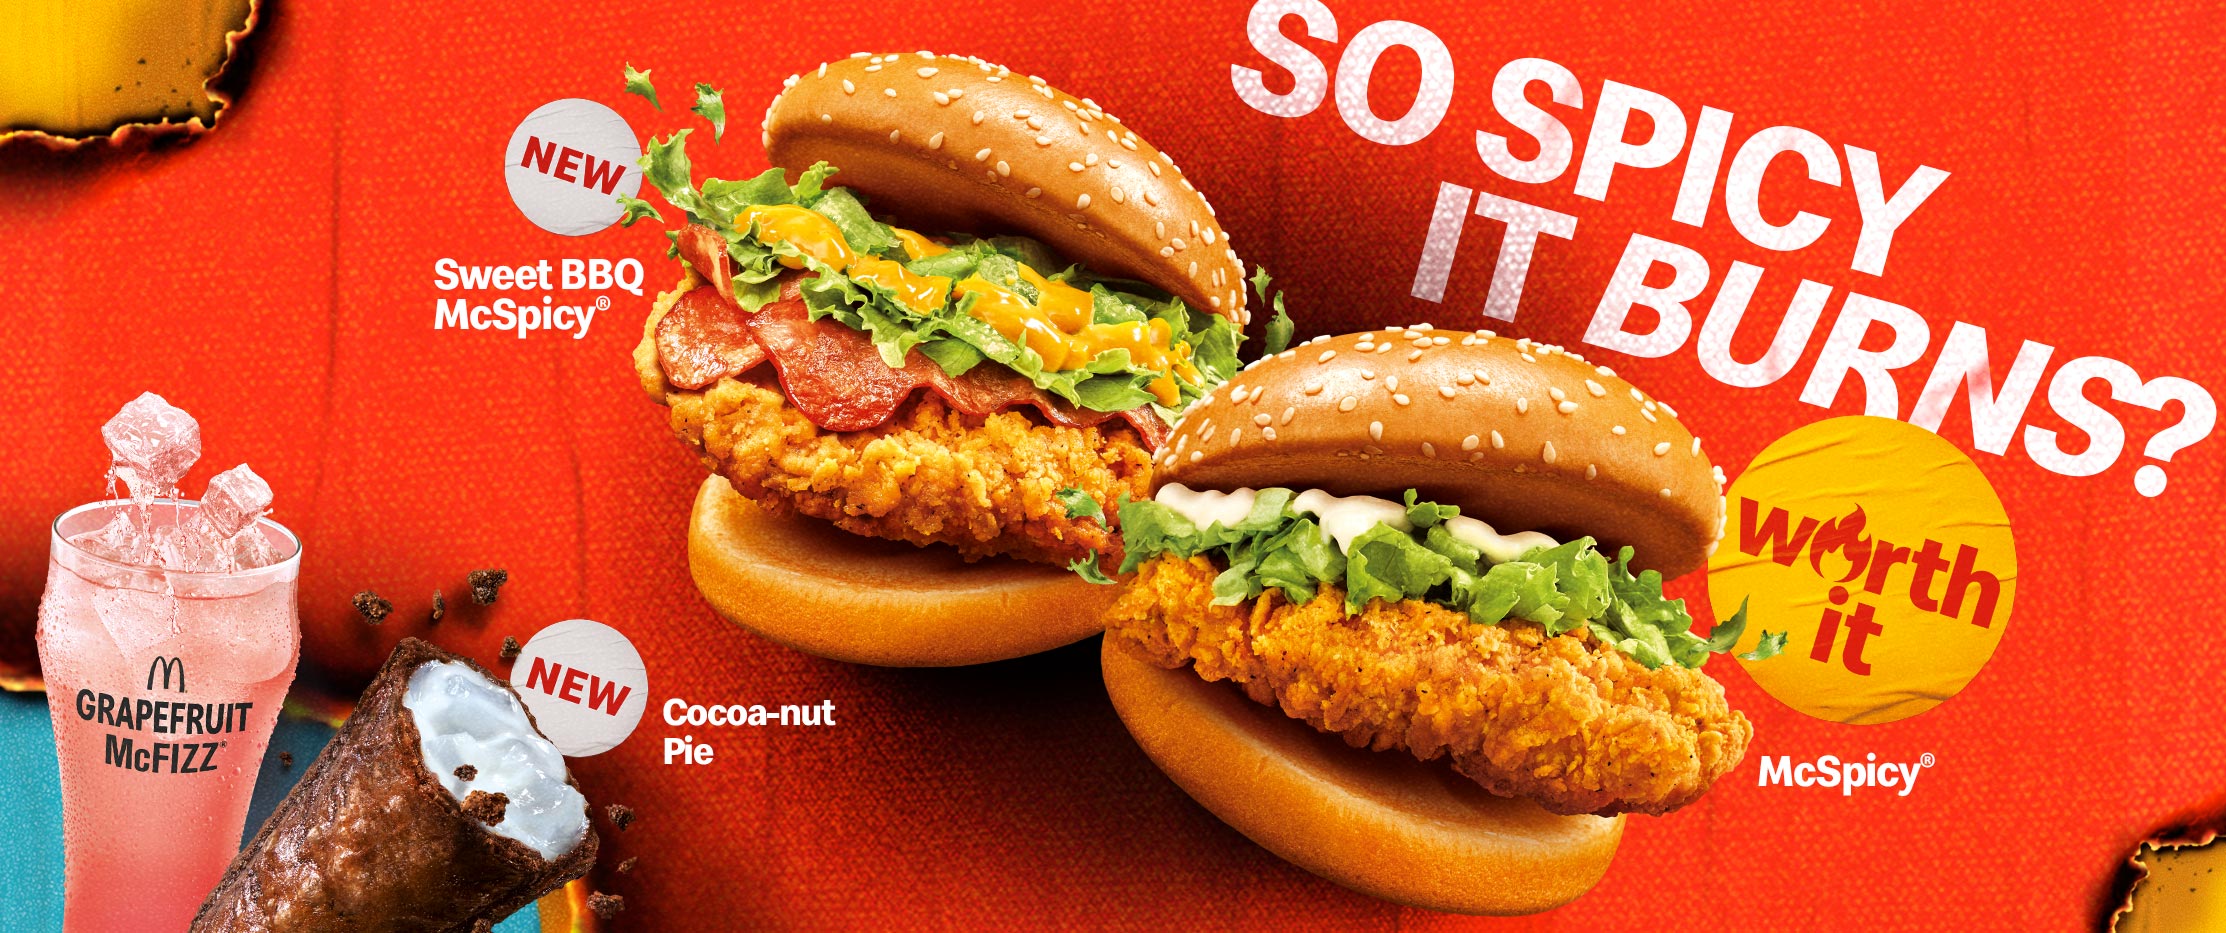 Sweet BBQ McSpicy®